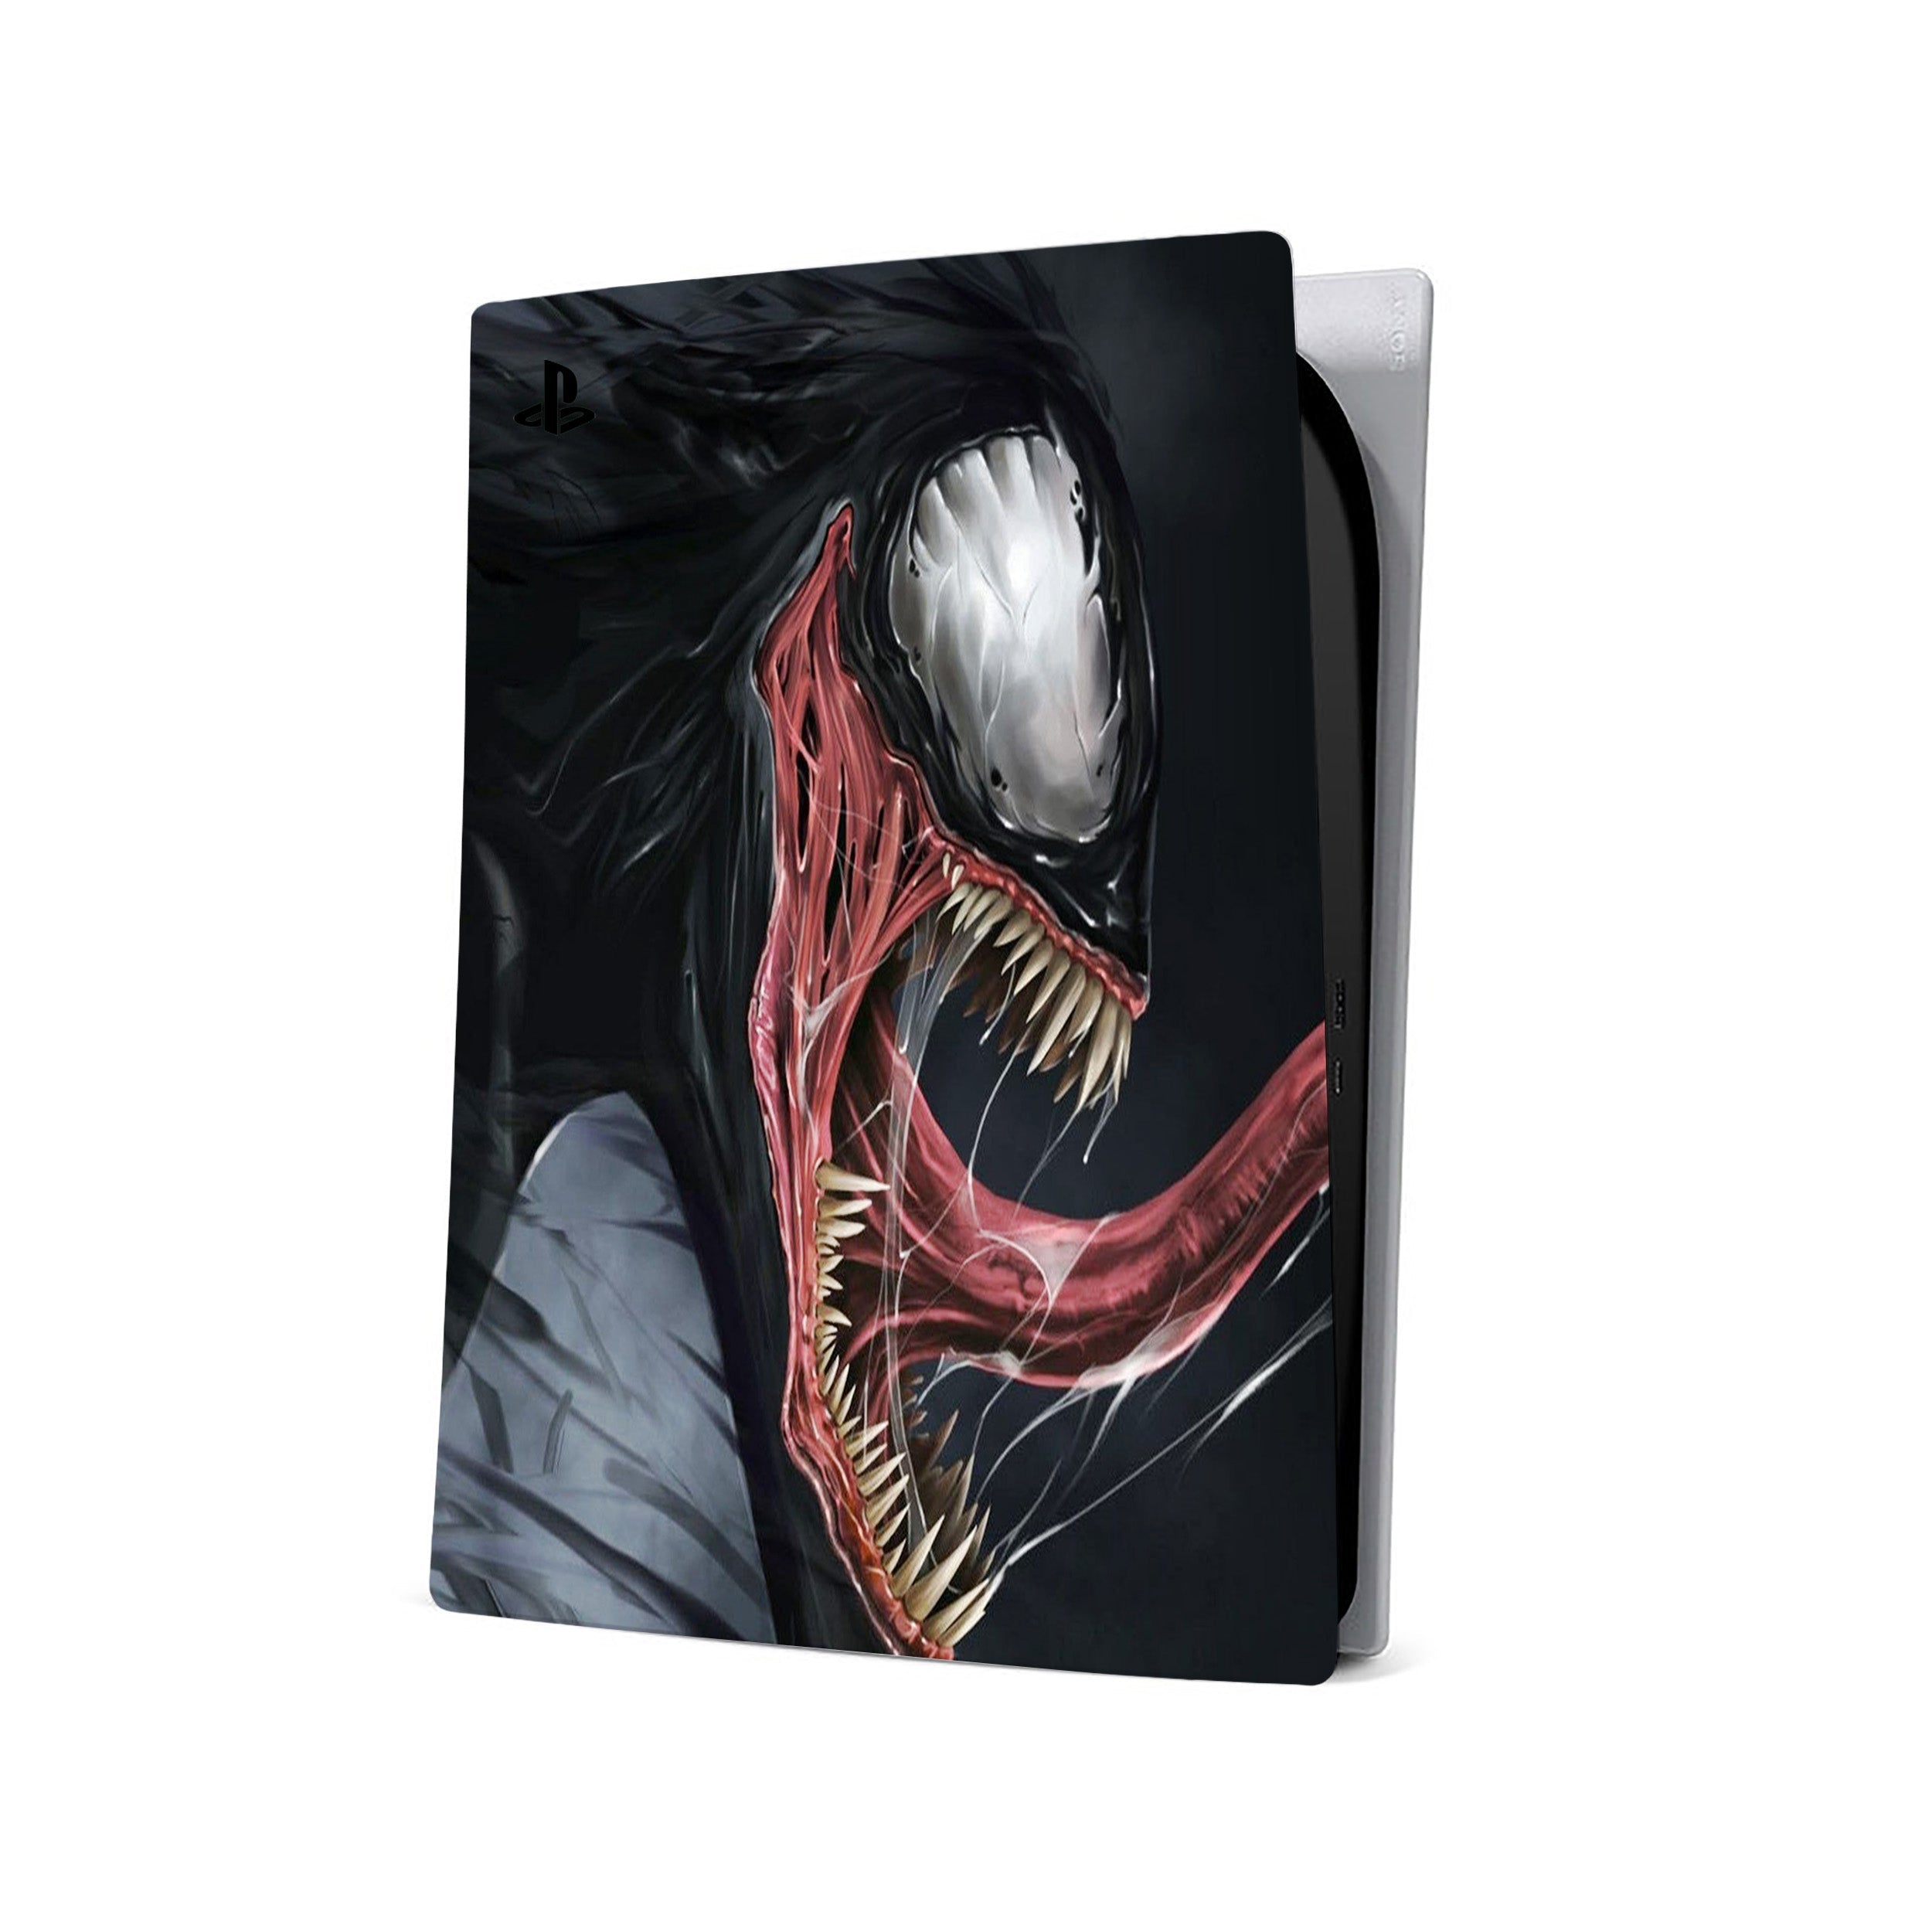 A video game skin featuring a Marvel Venom design for the PS5.